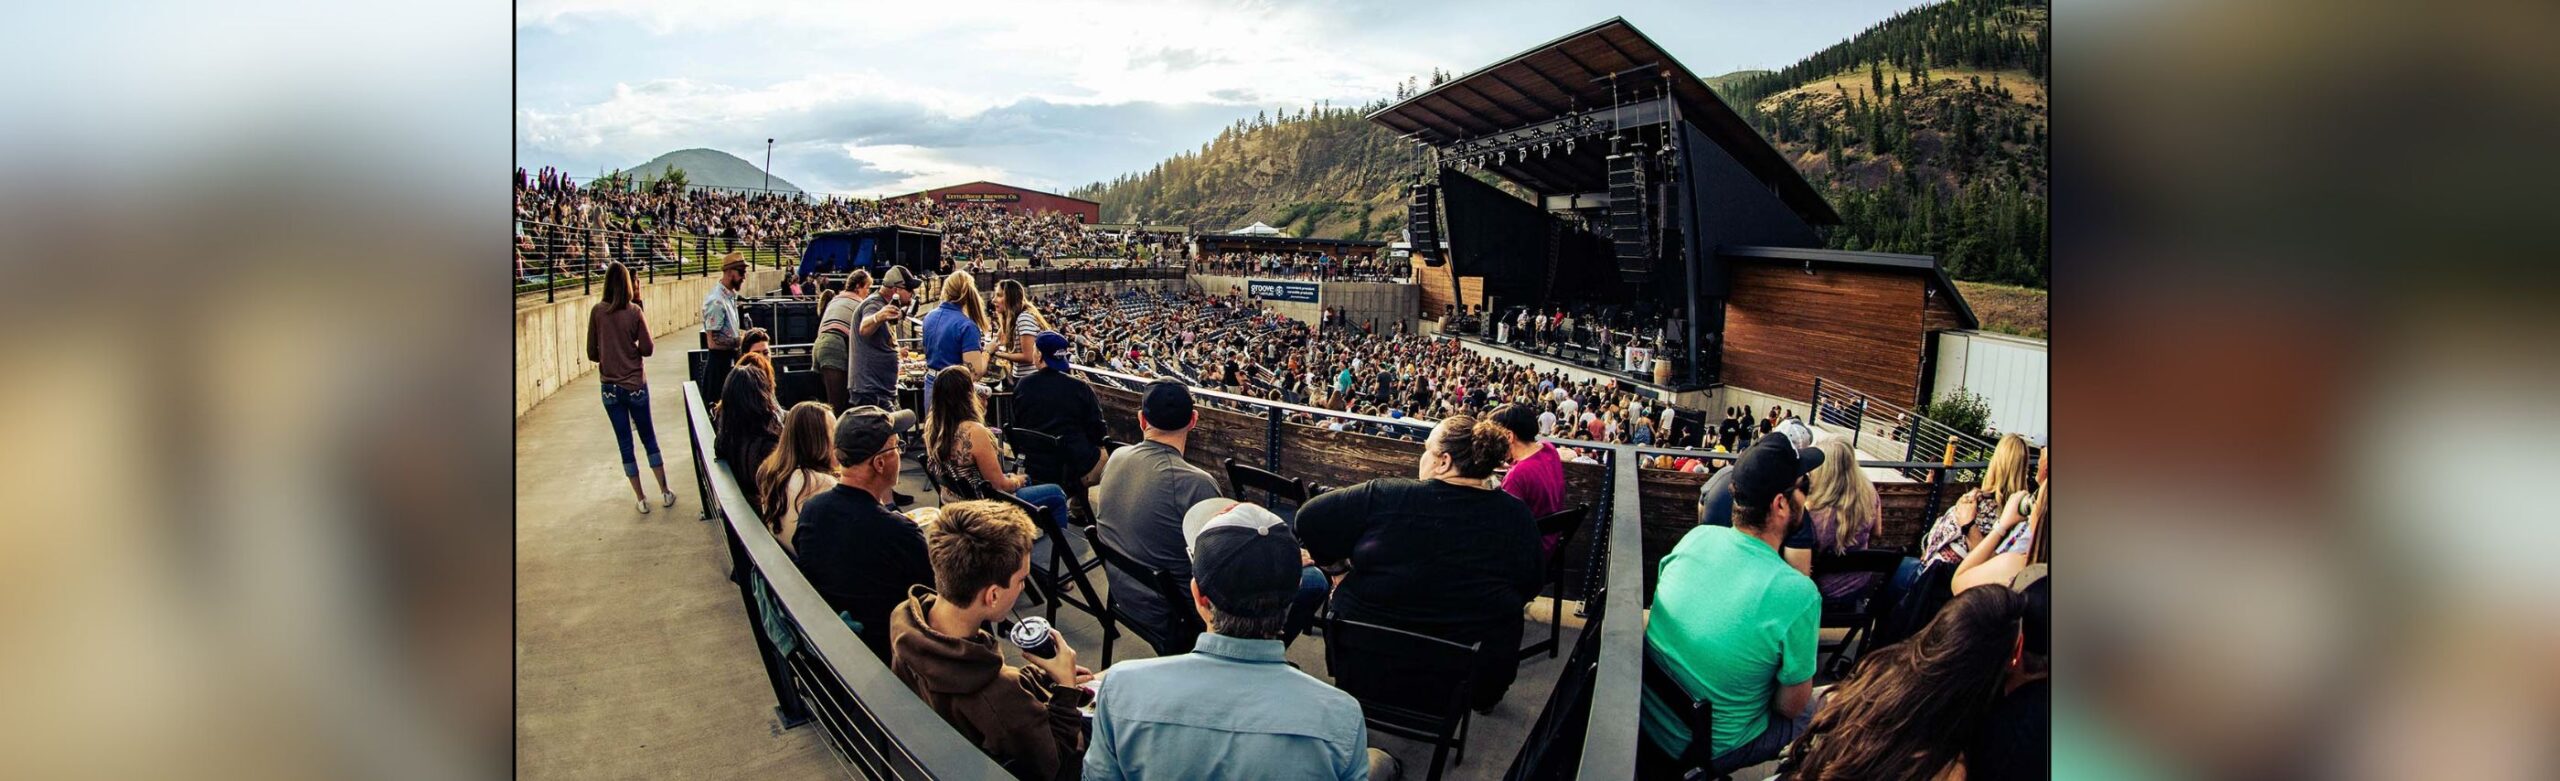 Now Available: Premium Box Seats for Pinky and the Floyd at KettleHouse Amphitheater Image